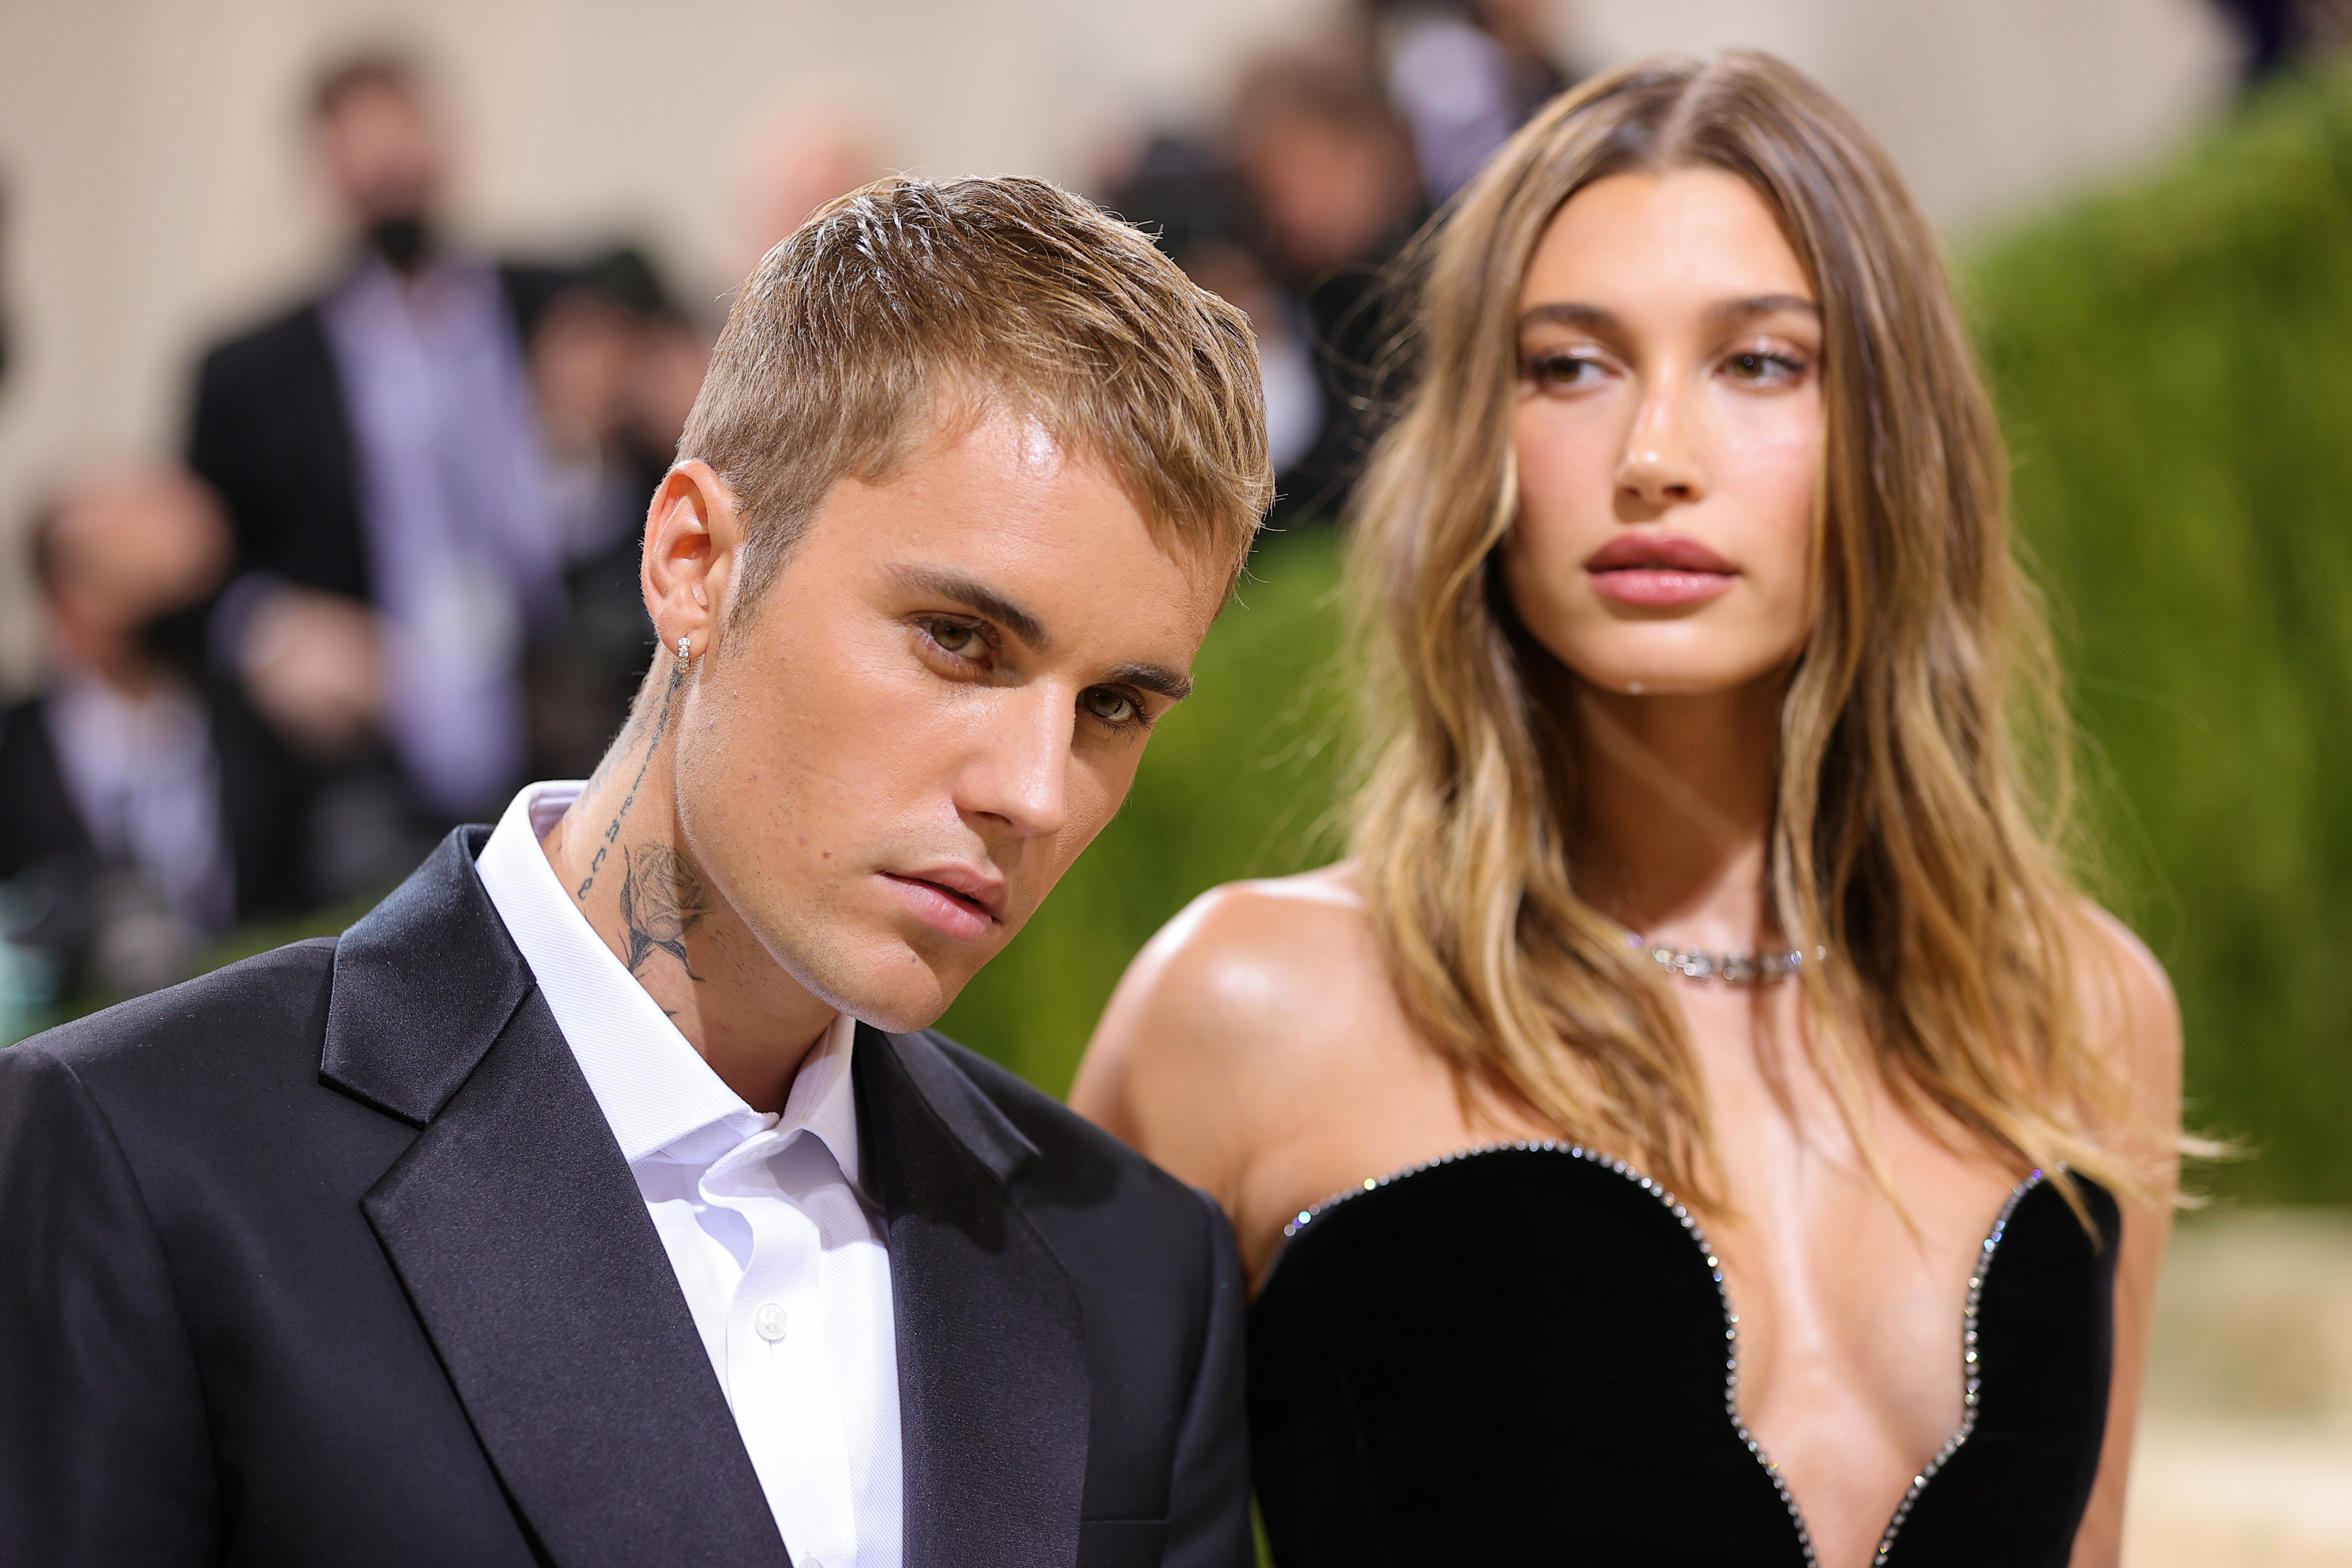 Some fans believe the model has been attempting to cover up the hardships in her marriage with social media posts centered around Justin